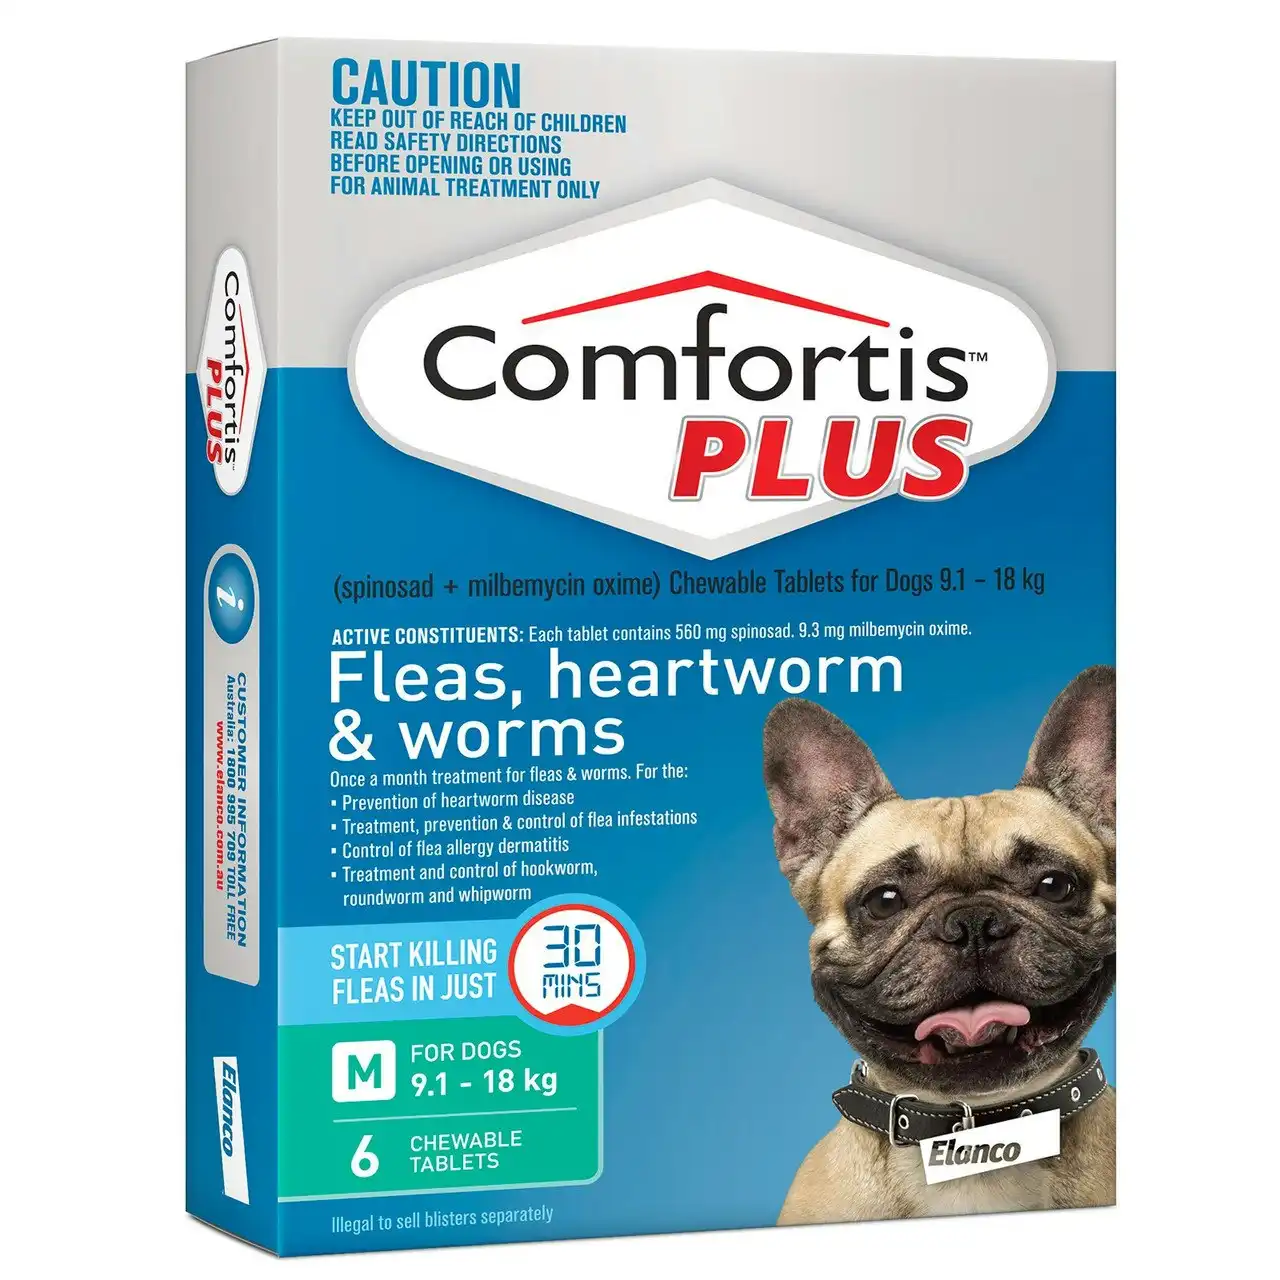 Comfortis(TM) PLUS Fleas, Heartworm & Worms for Dogs 9.1 - 18kg - 6 Pack